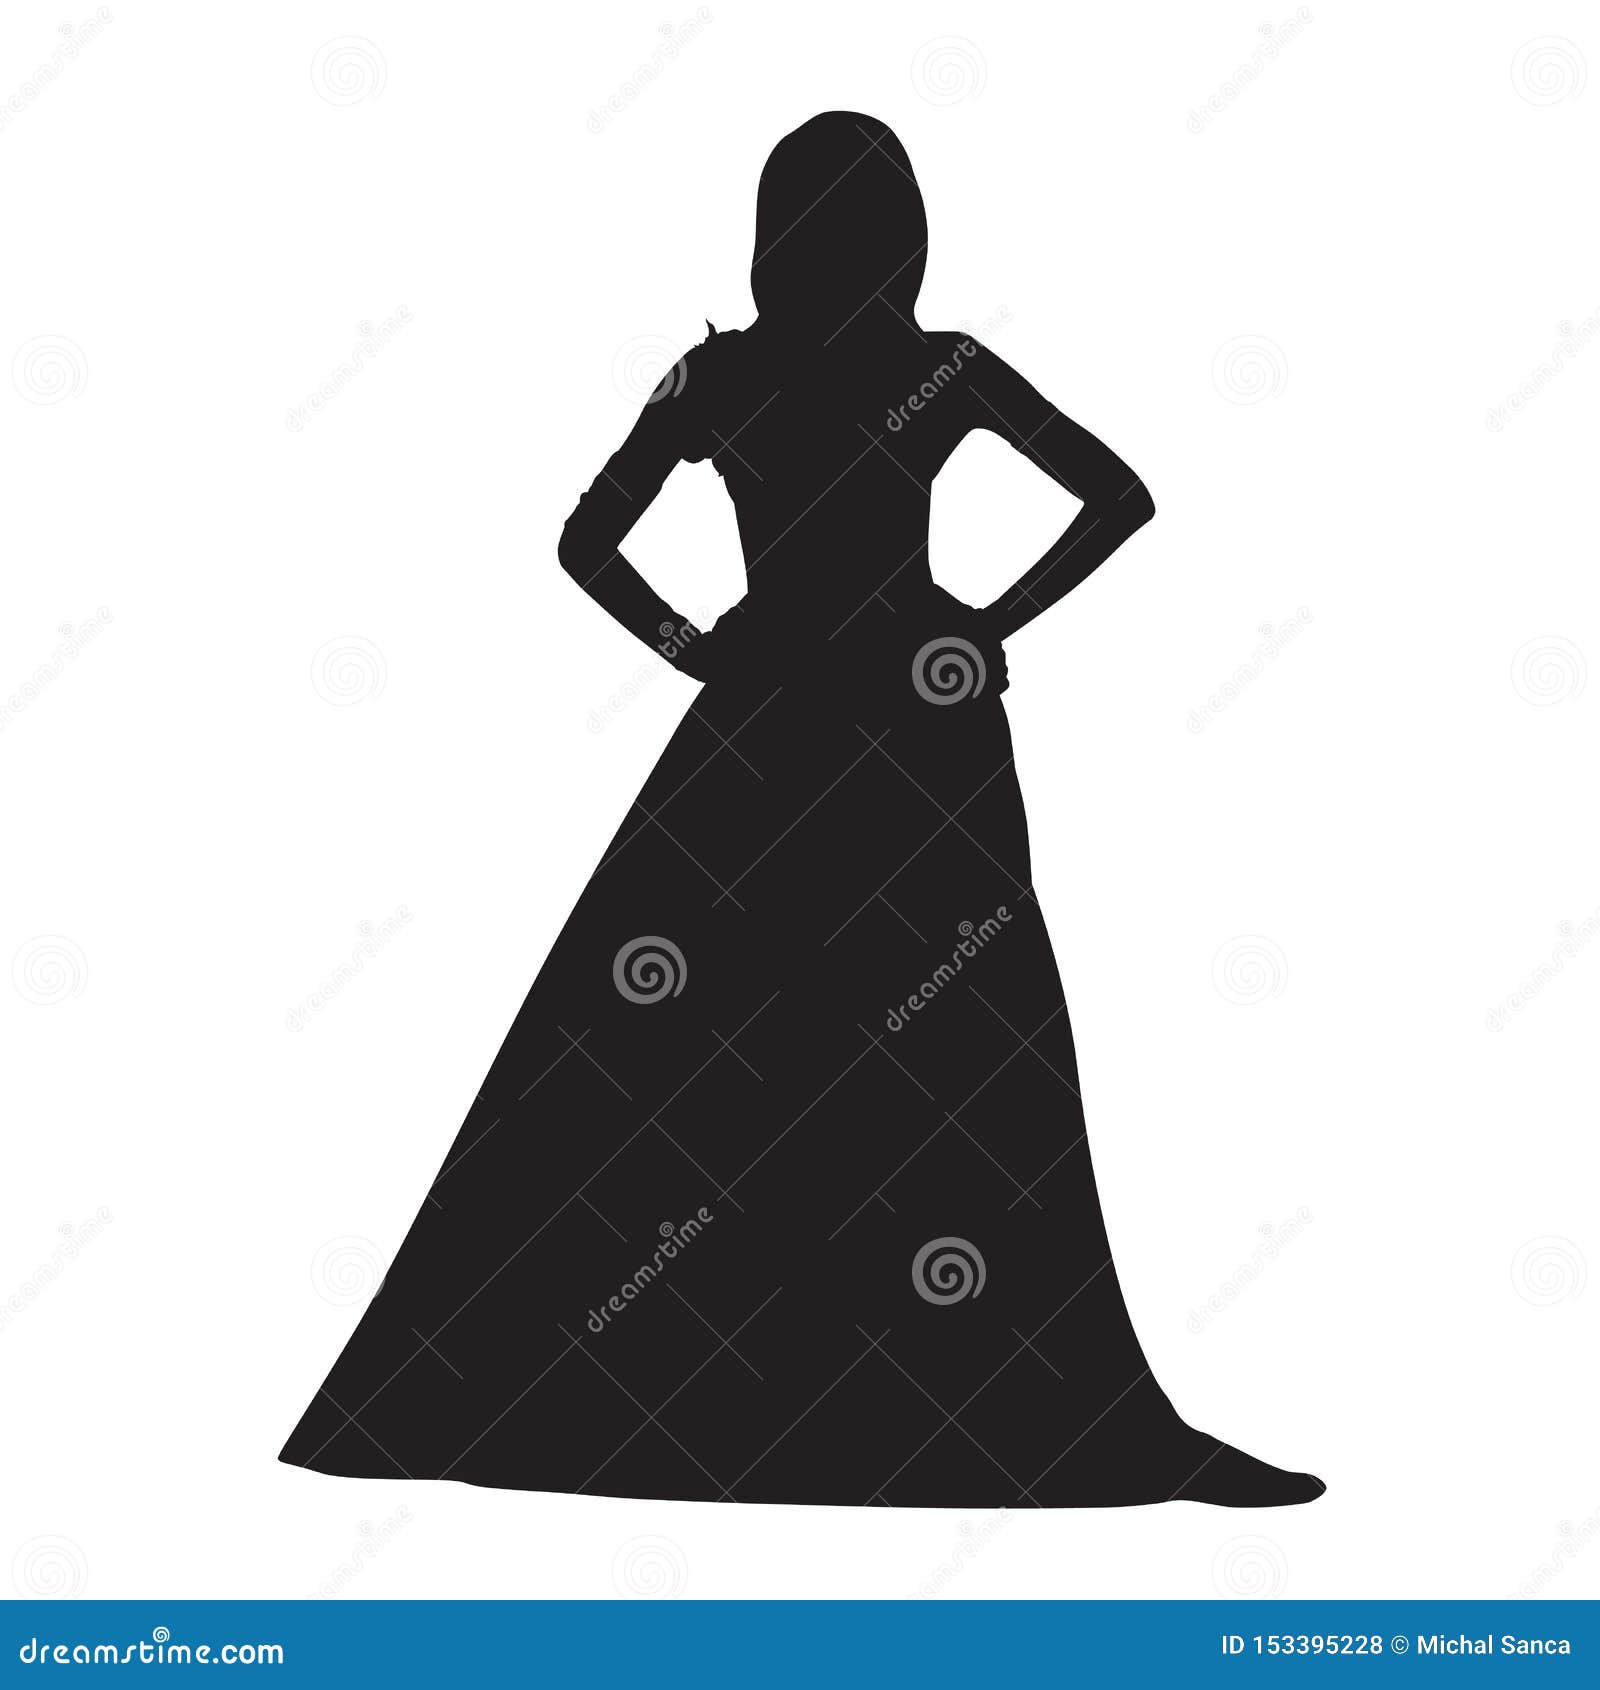 woman clothed in long night dress,   silhouette. hands on hips